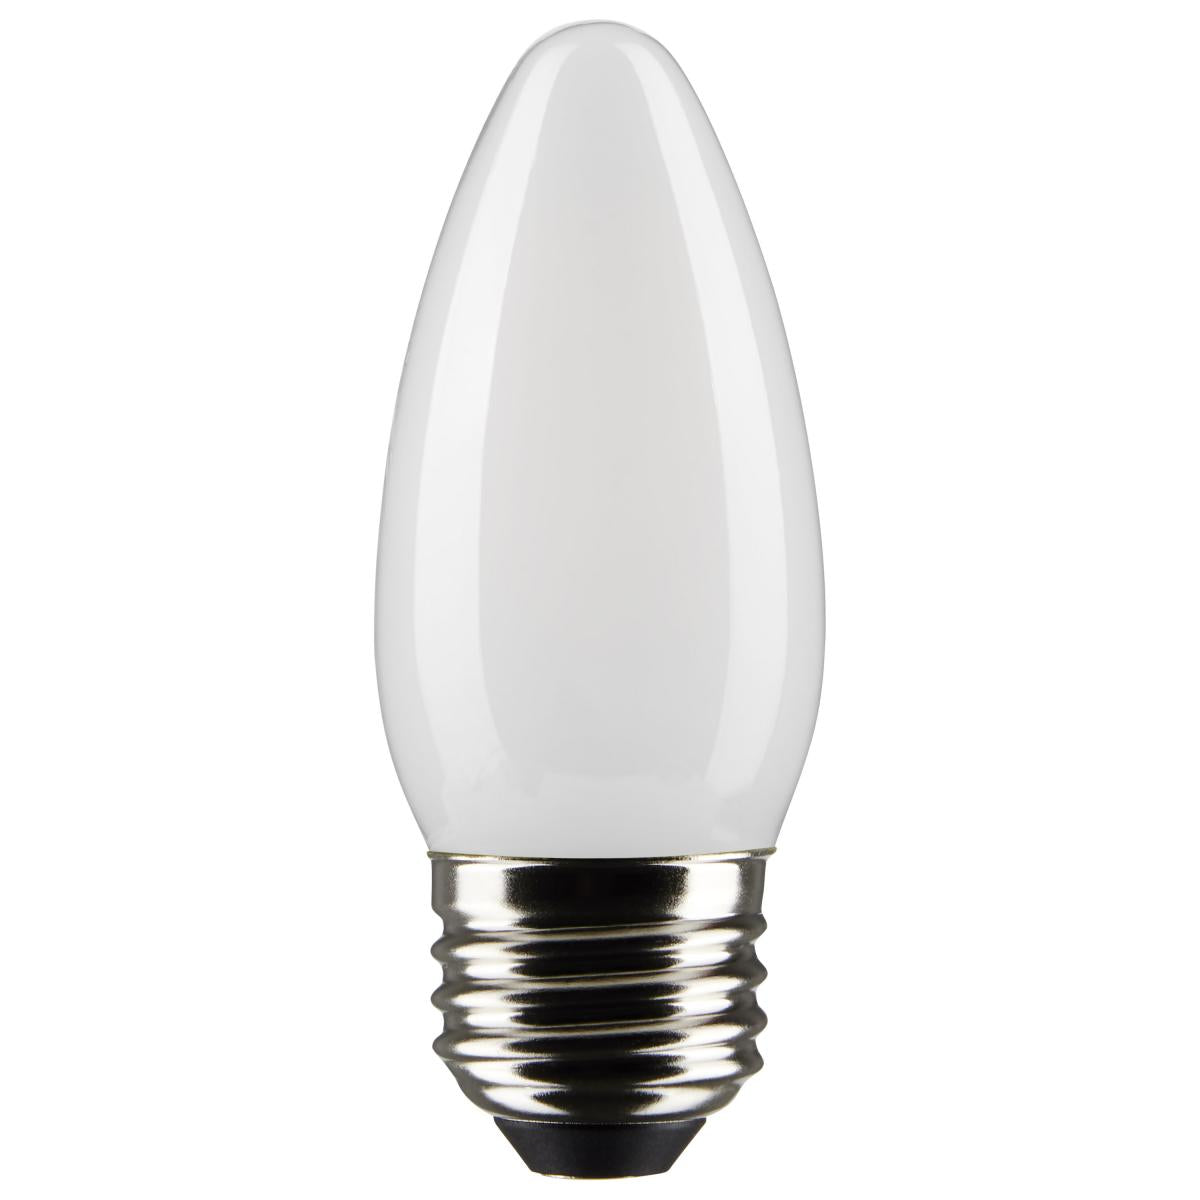 Replacement for Satco S3735 40W TORPEDO FR 40 B11 Frost Incandescent Medium base - NOW LED S21836